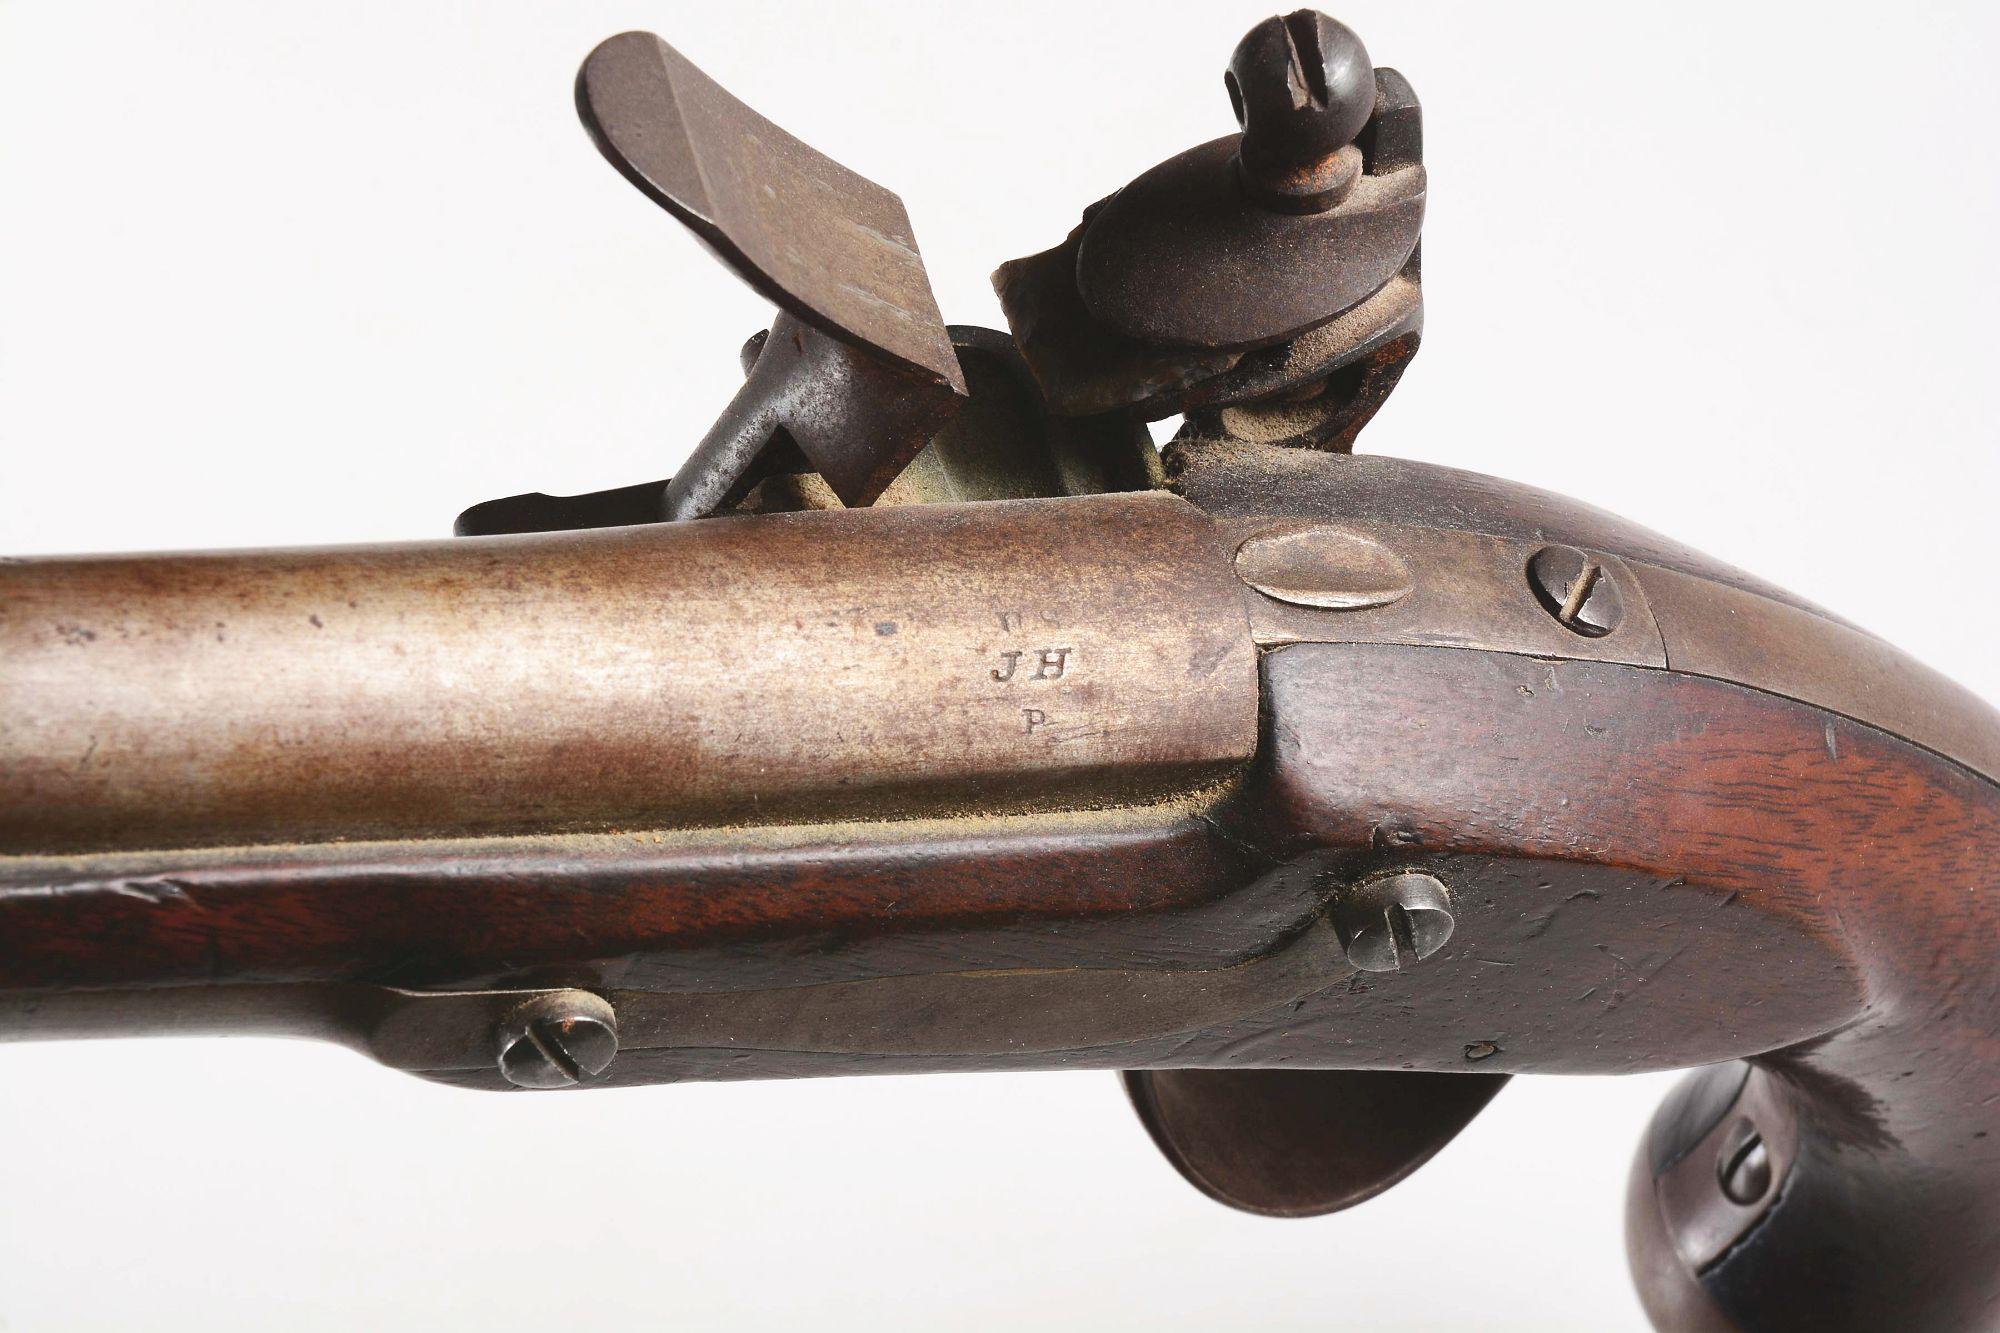 (A) AN EXTREMELY UNUSUAL "VARIANT EAGLE MARKED" MODEL 1836 US FLINTLOCK MARTIAL PISTOL.